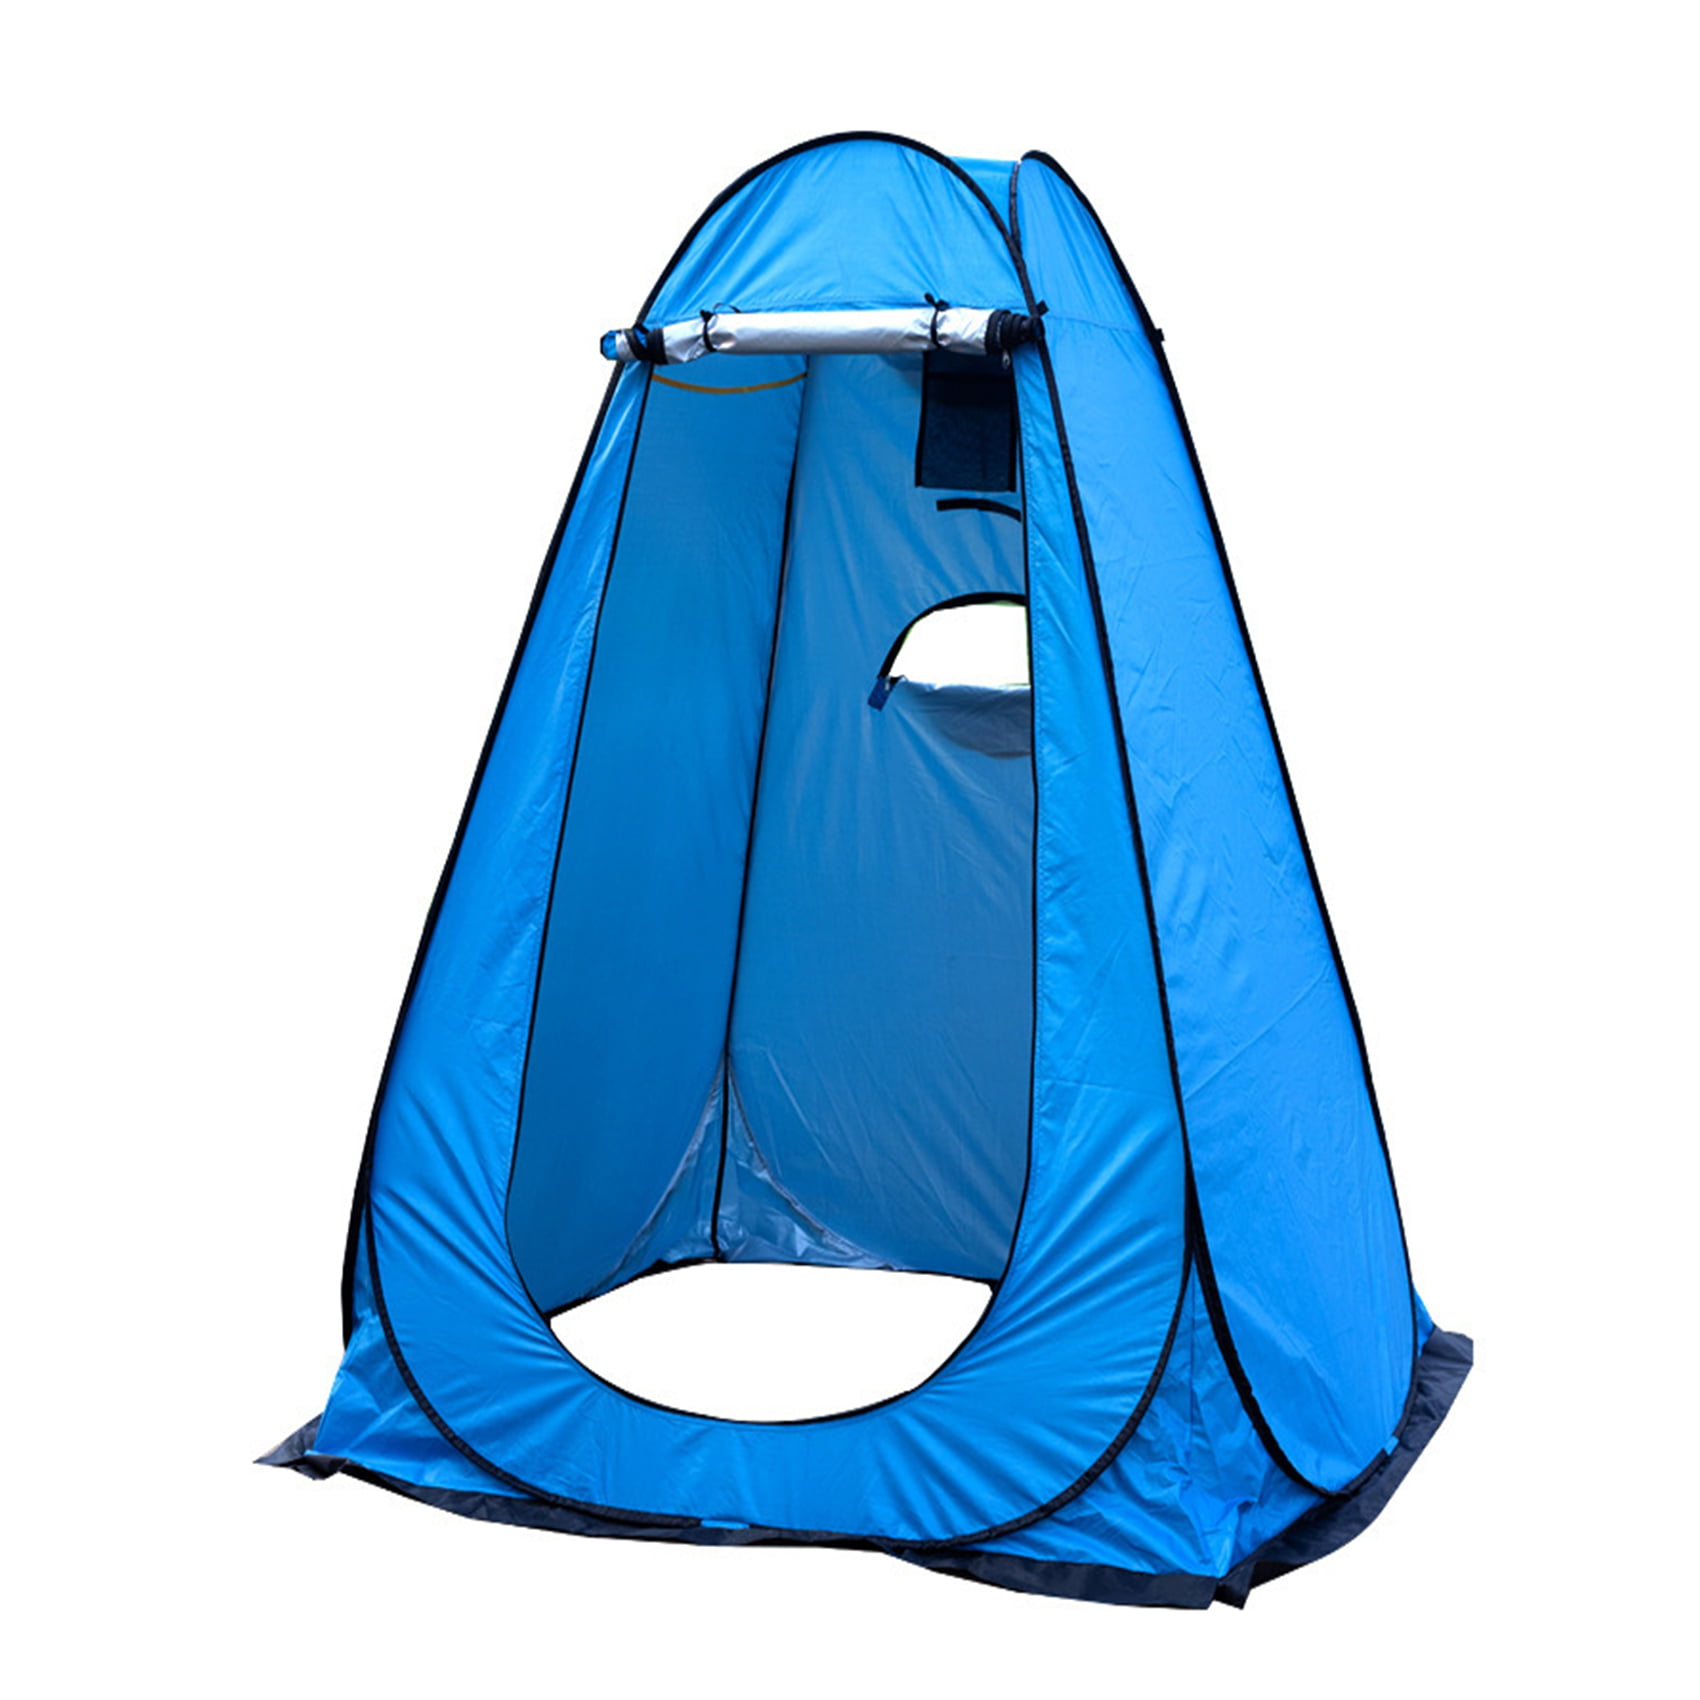 Upgrade Portable Pop Up Tent Camping Beach Toilet Shower Changing Room+Carry Bag